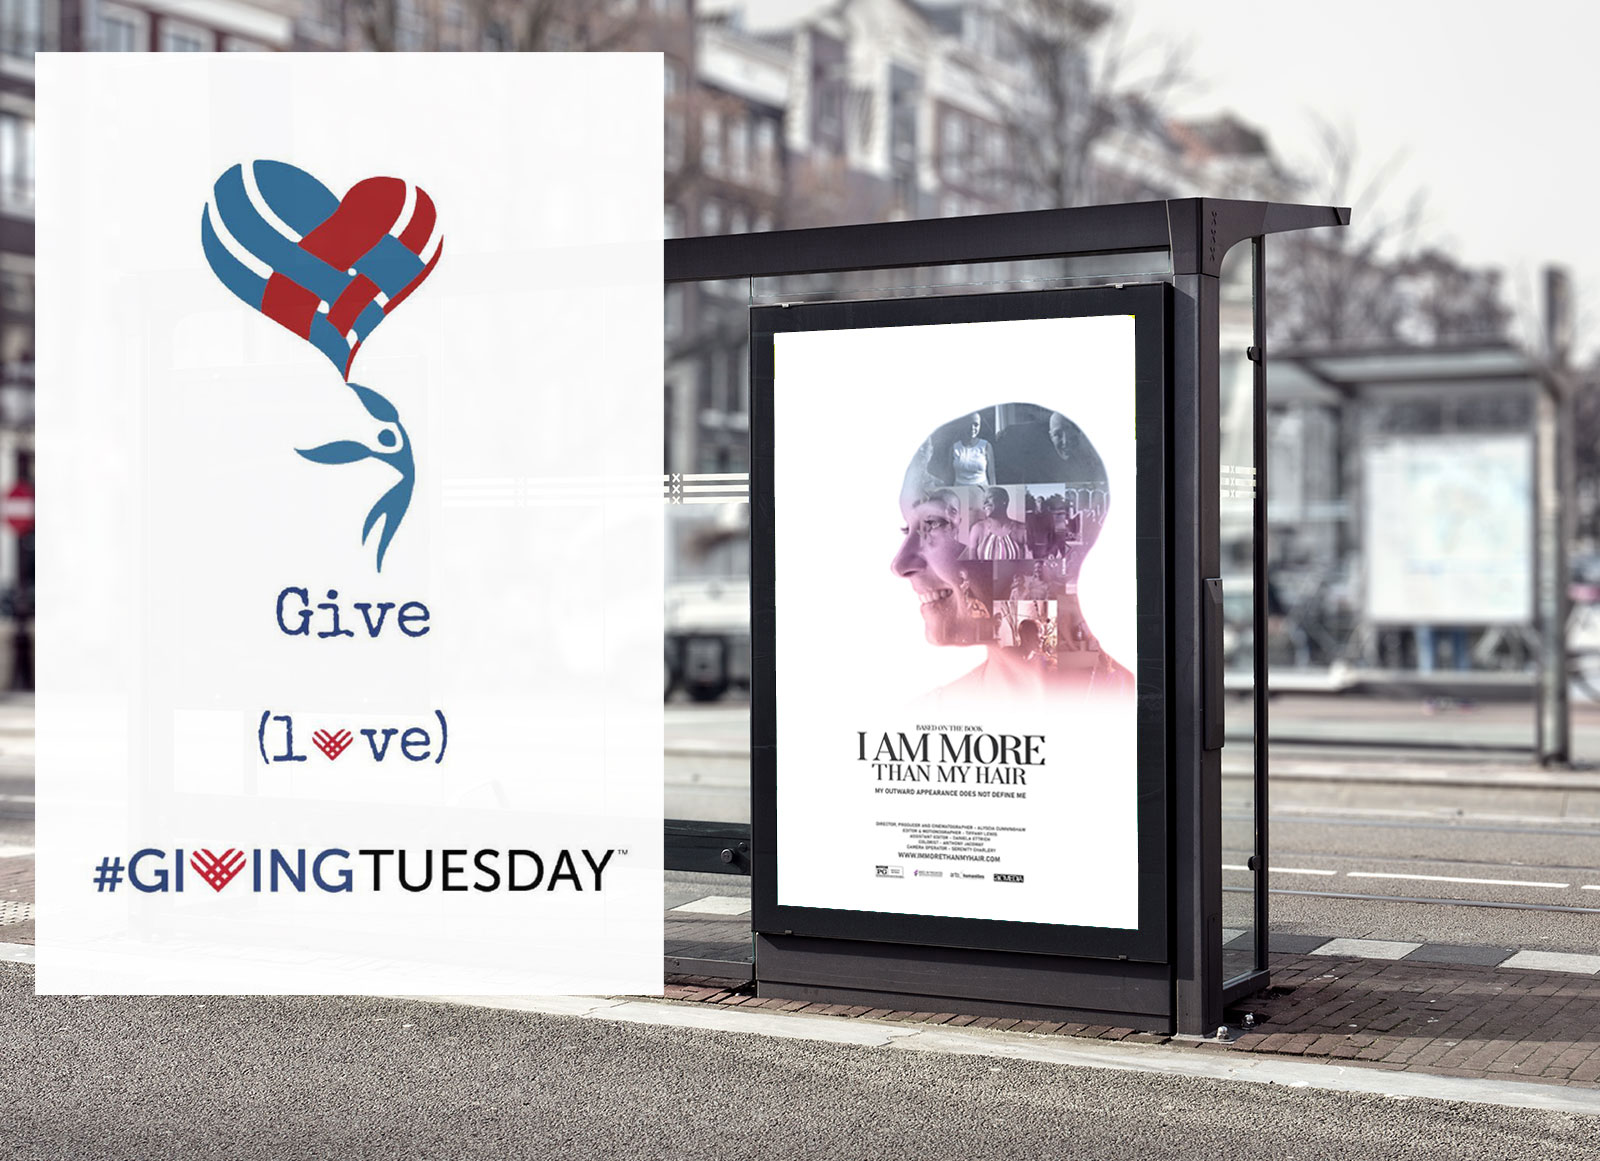 I-am-more-than-my-hair-bus-shelter-billboard_givingtuesday